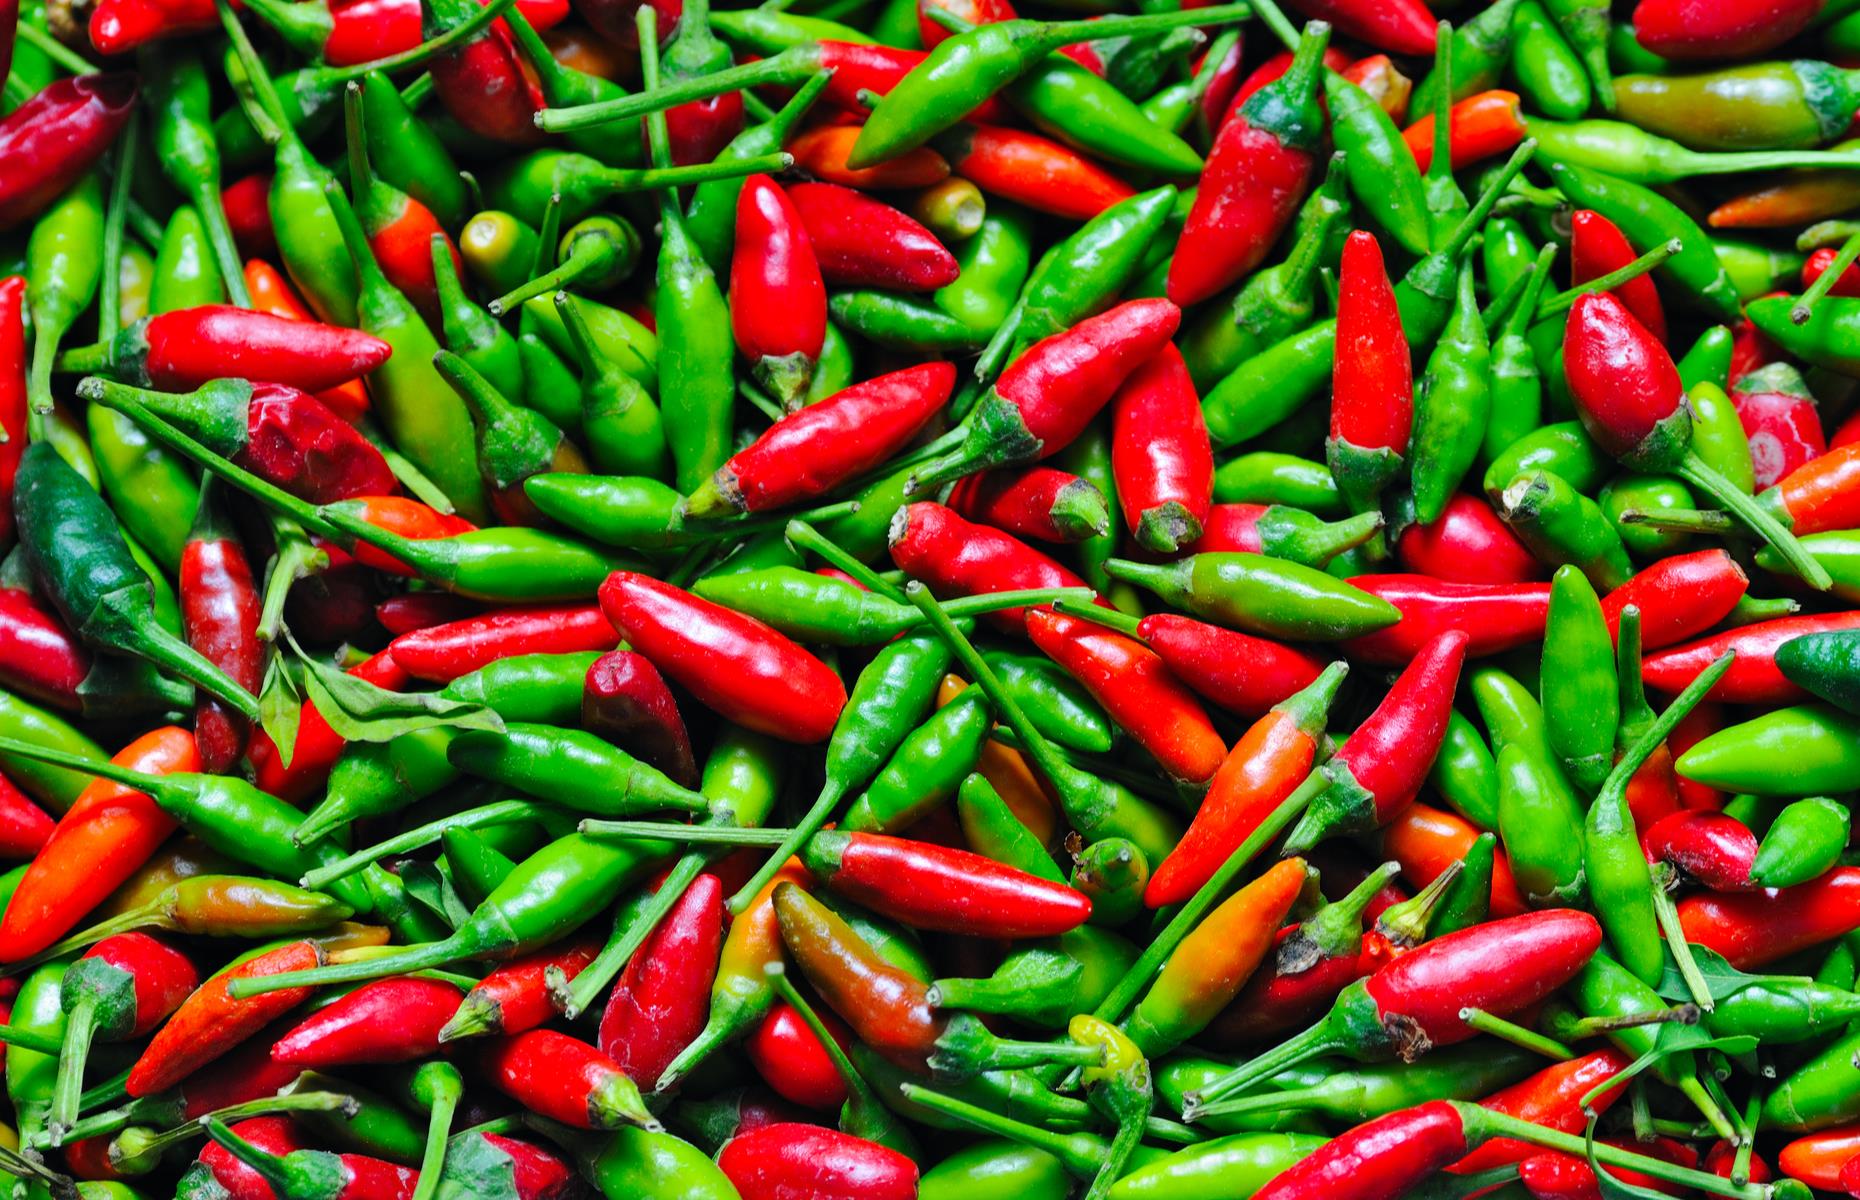 <p>The importance of chile peppers goes further, though, spawning <a href="https://thepack.unm.edu/red-green/">an official state question</a>: “Red or Green?” The answer reveals one’s preference to chiles grown and typically eaten in different parts of the state, with those in the south traditionally favoring green chiles and others opting for slightly smoother, smokier red chiles.</p>